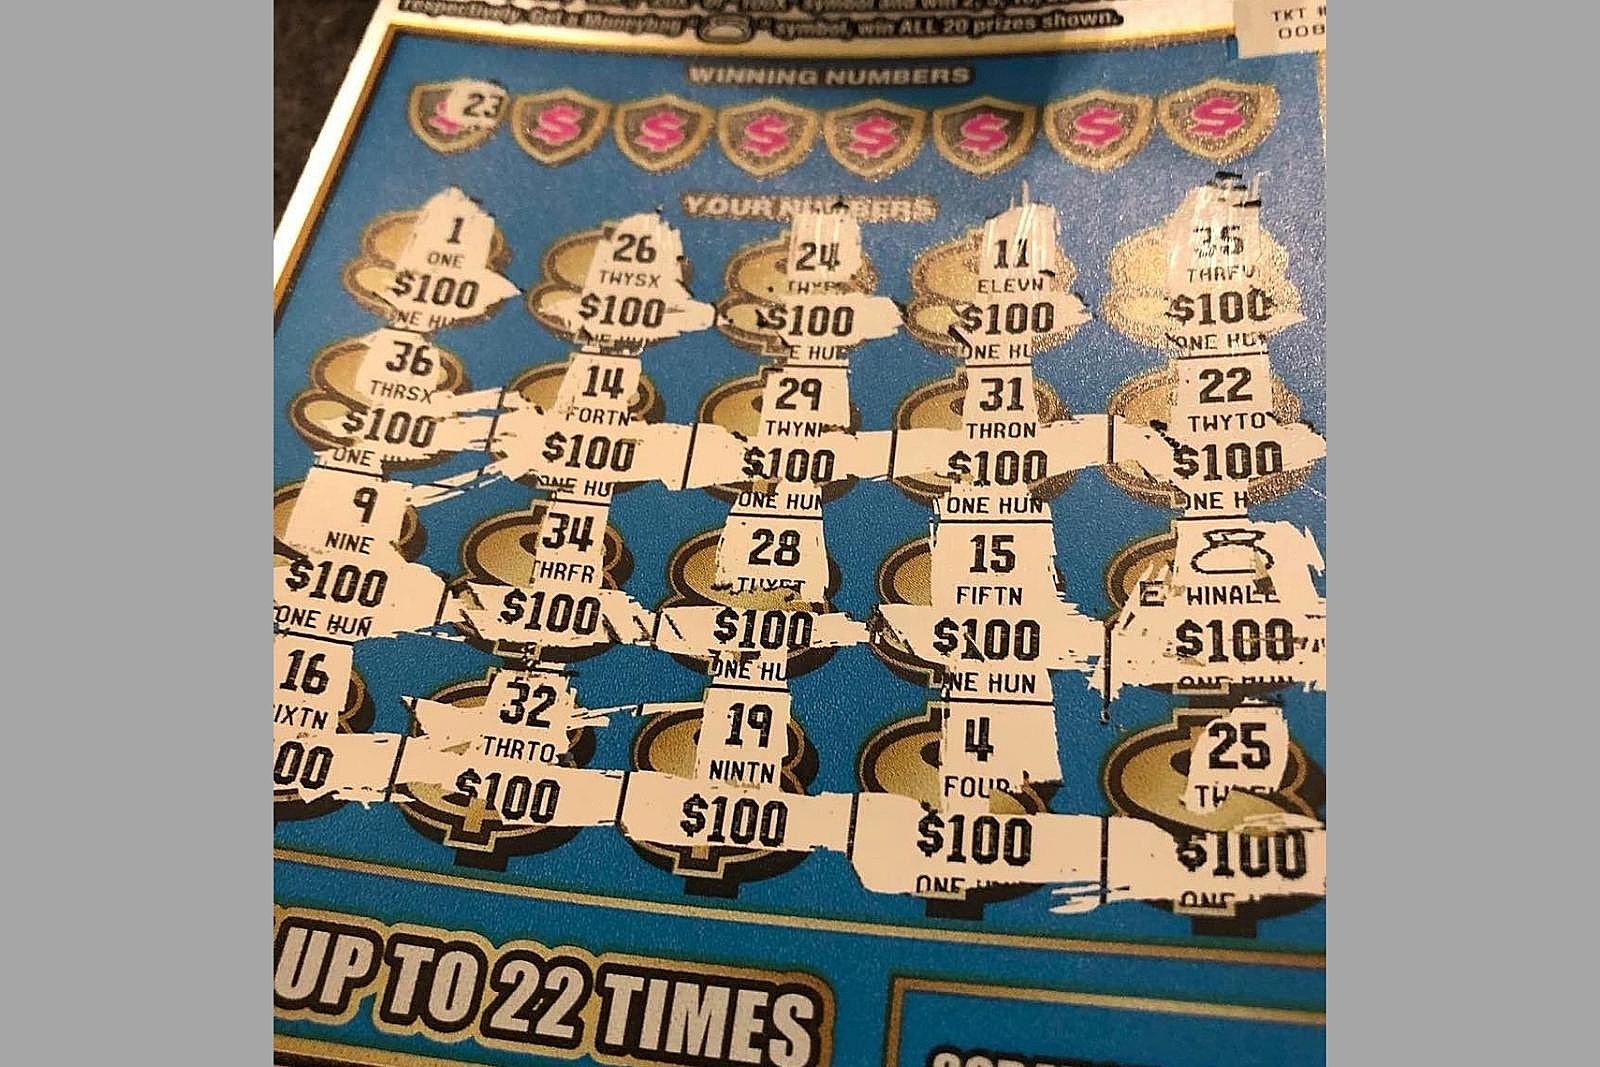 Massachusetts Set Scratch Ticket Sales Records, But Did You Win?